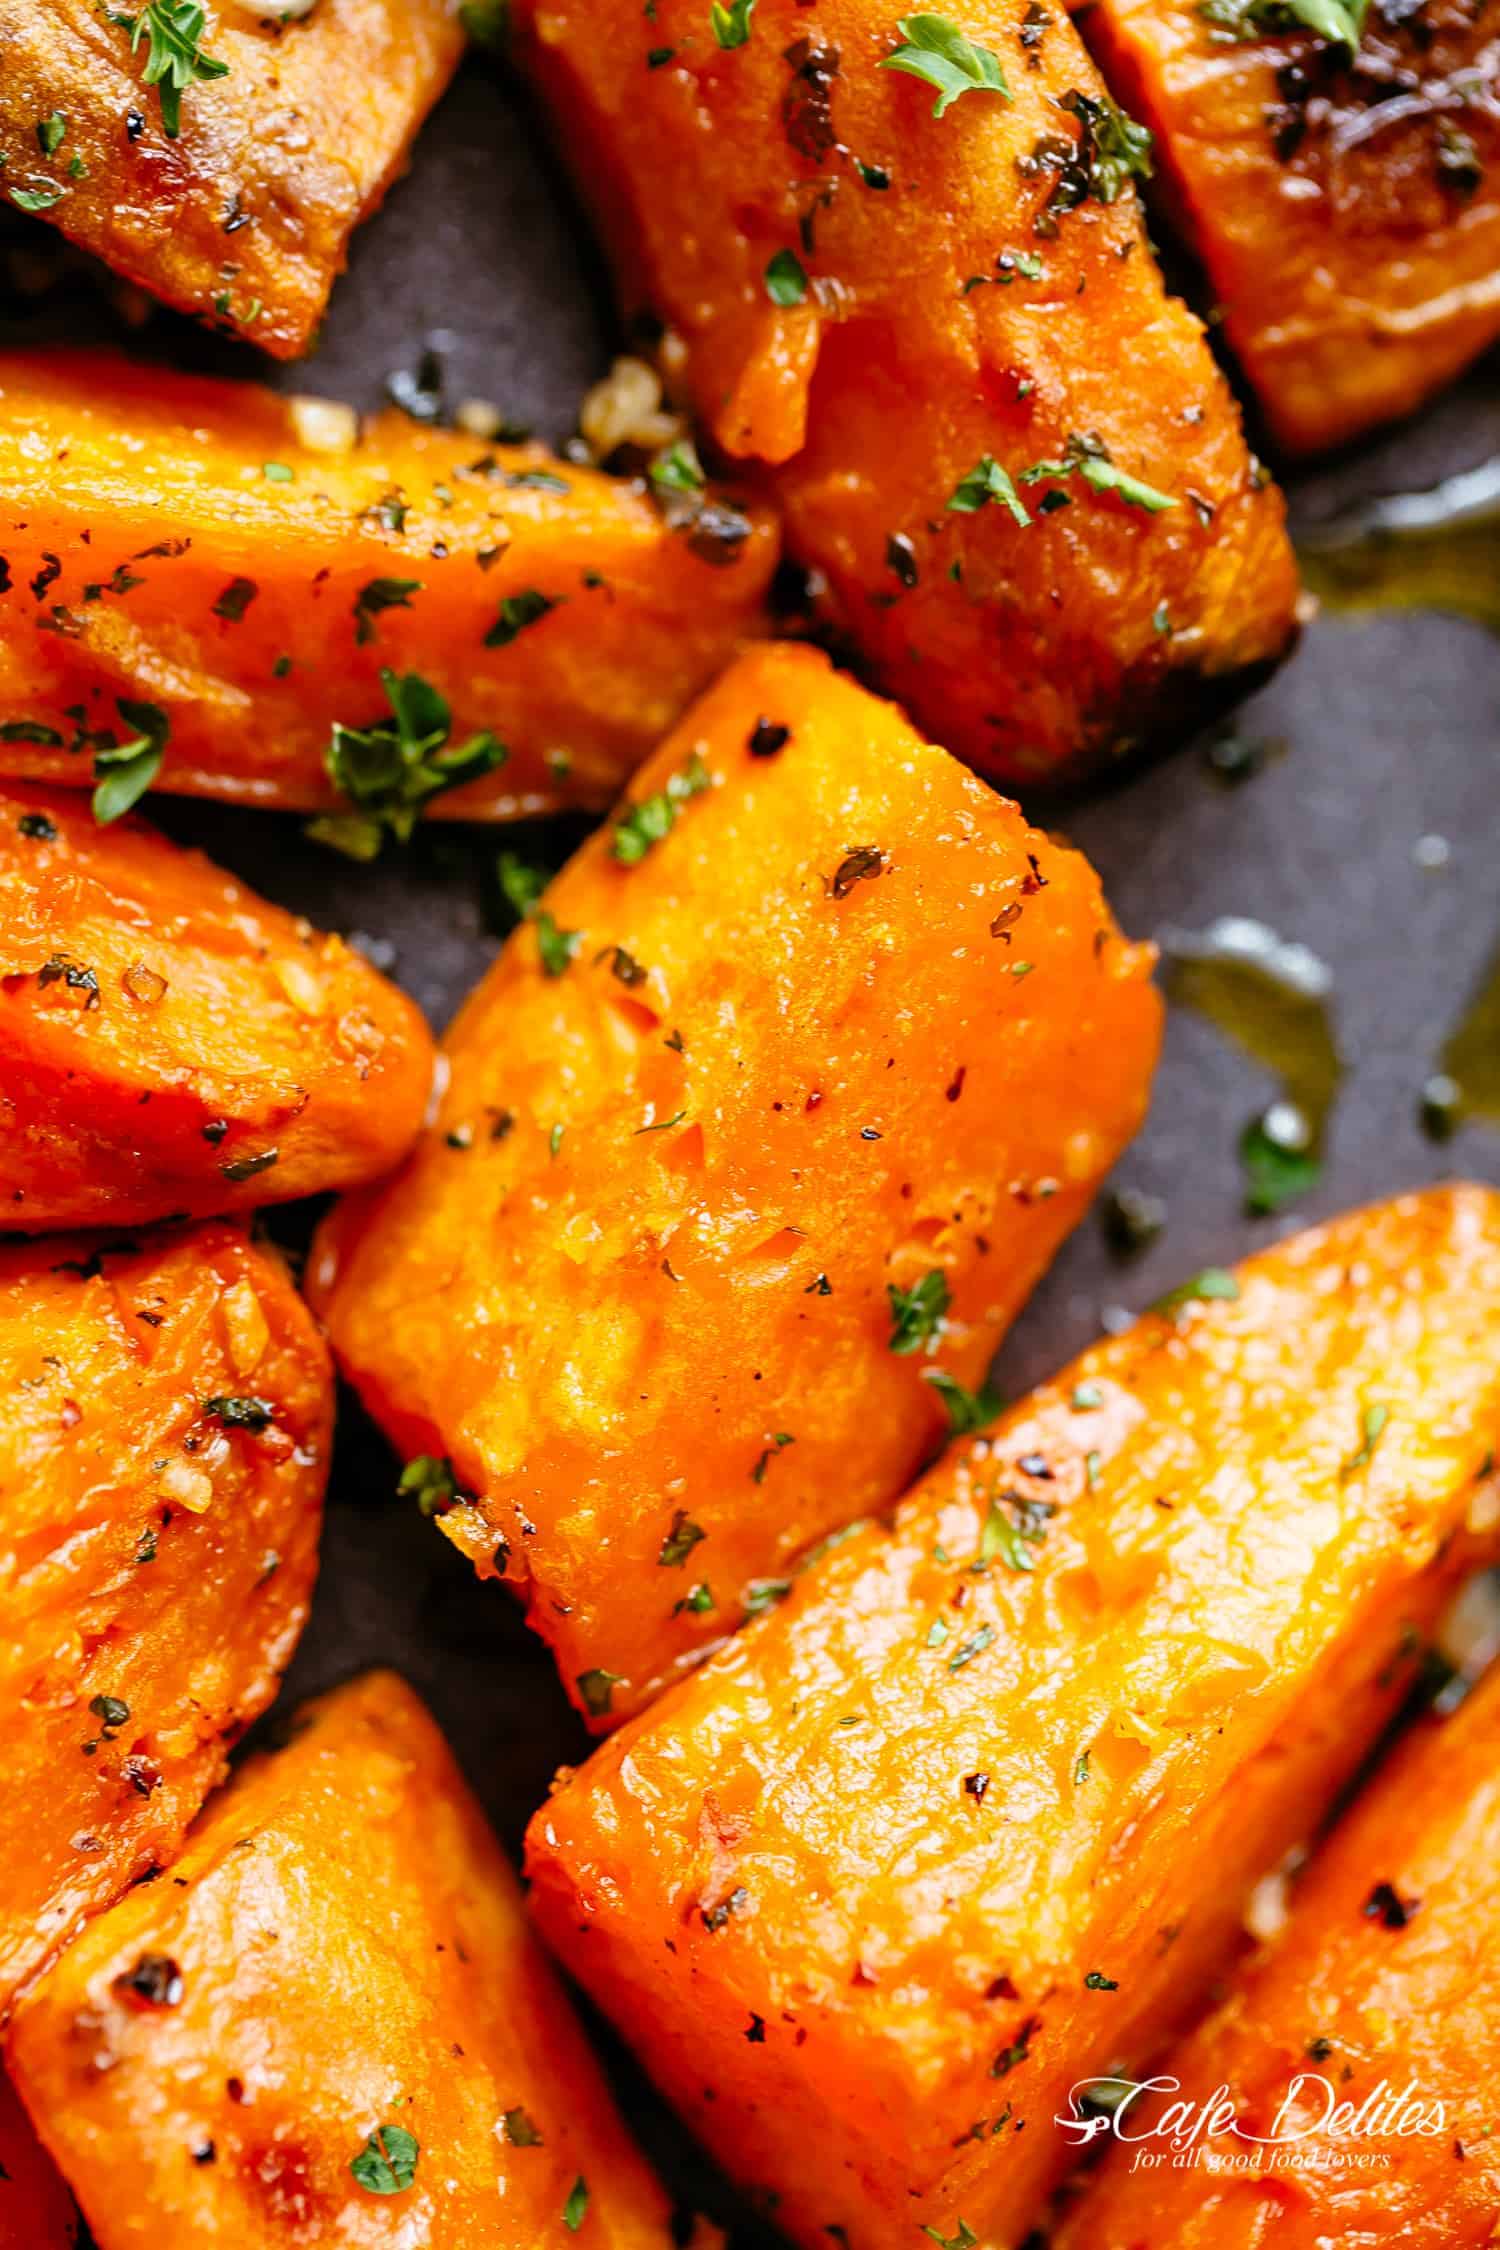 Roasted Sweet Potatoes with garlic, herbs and olive oil.